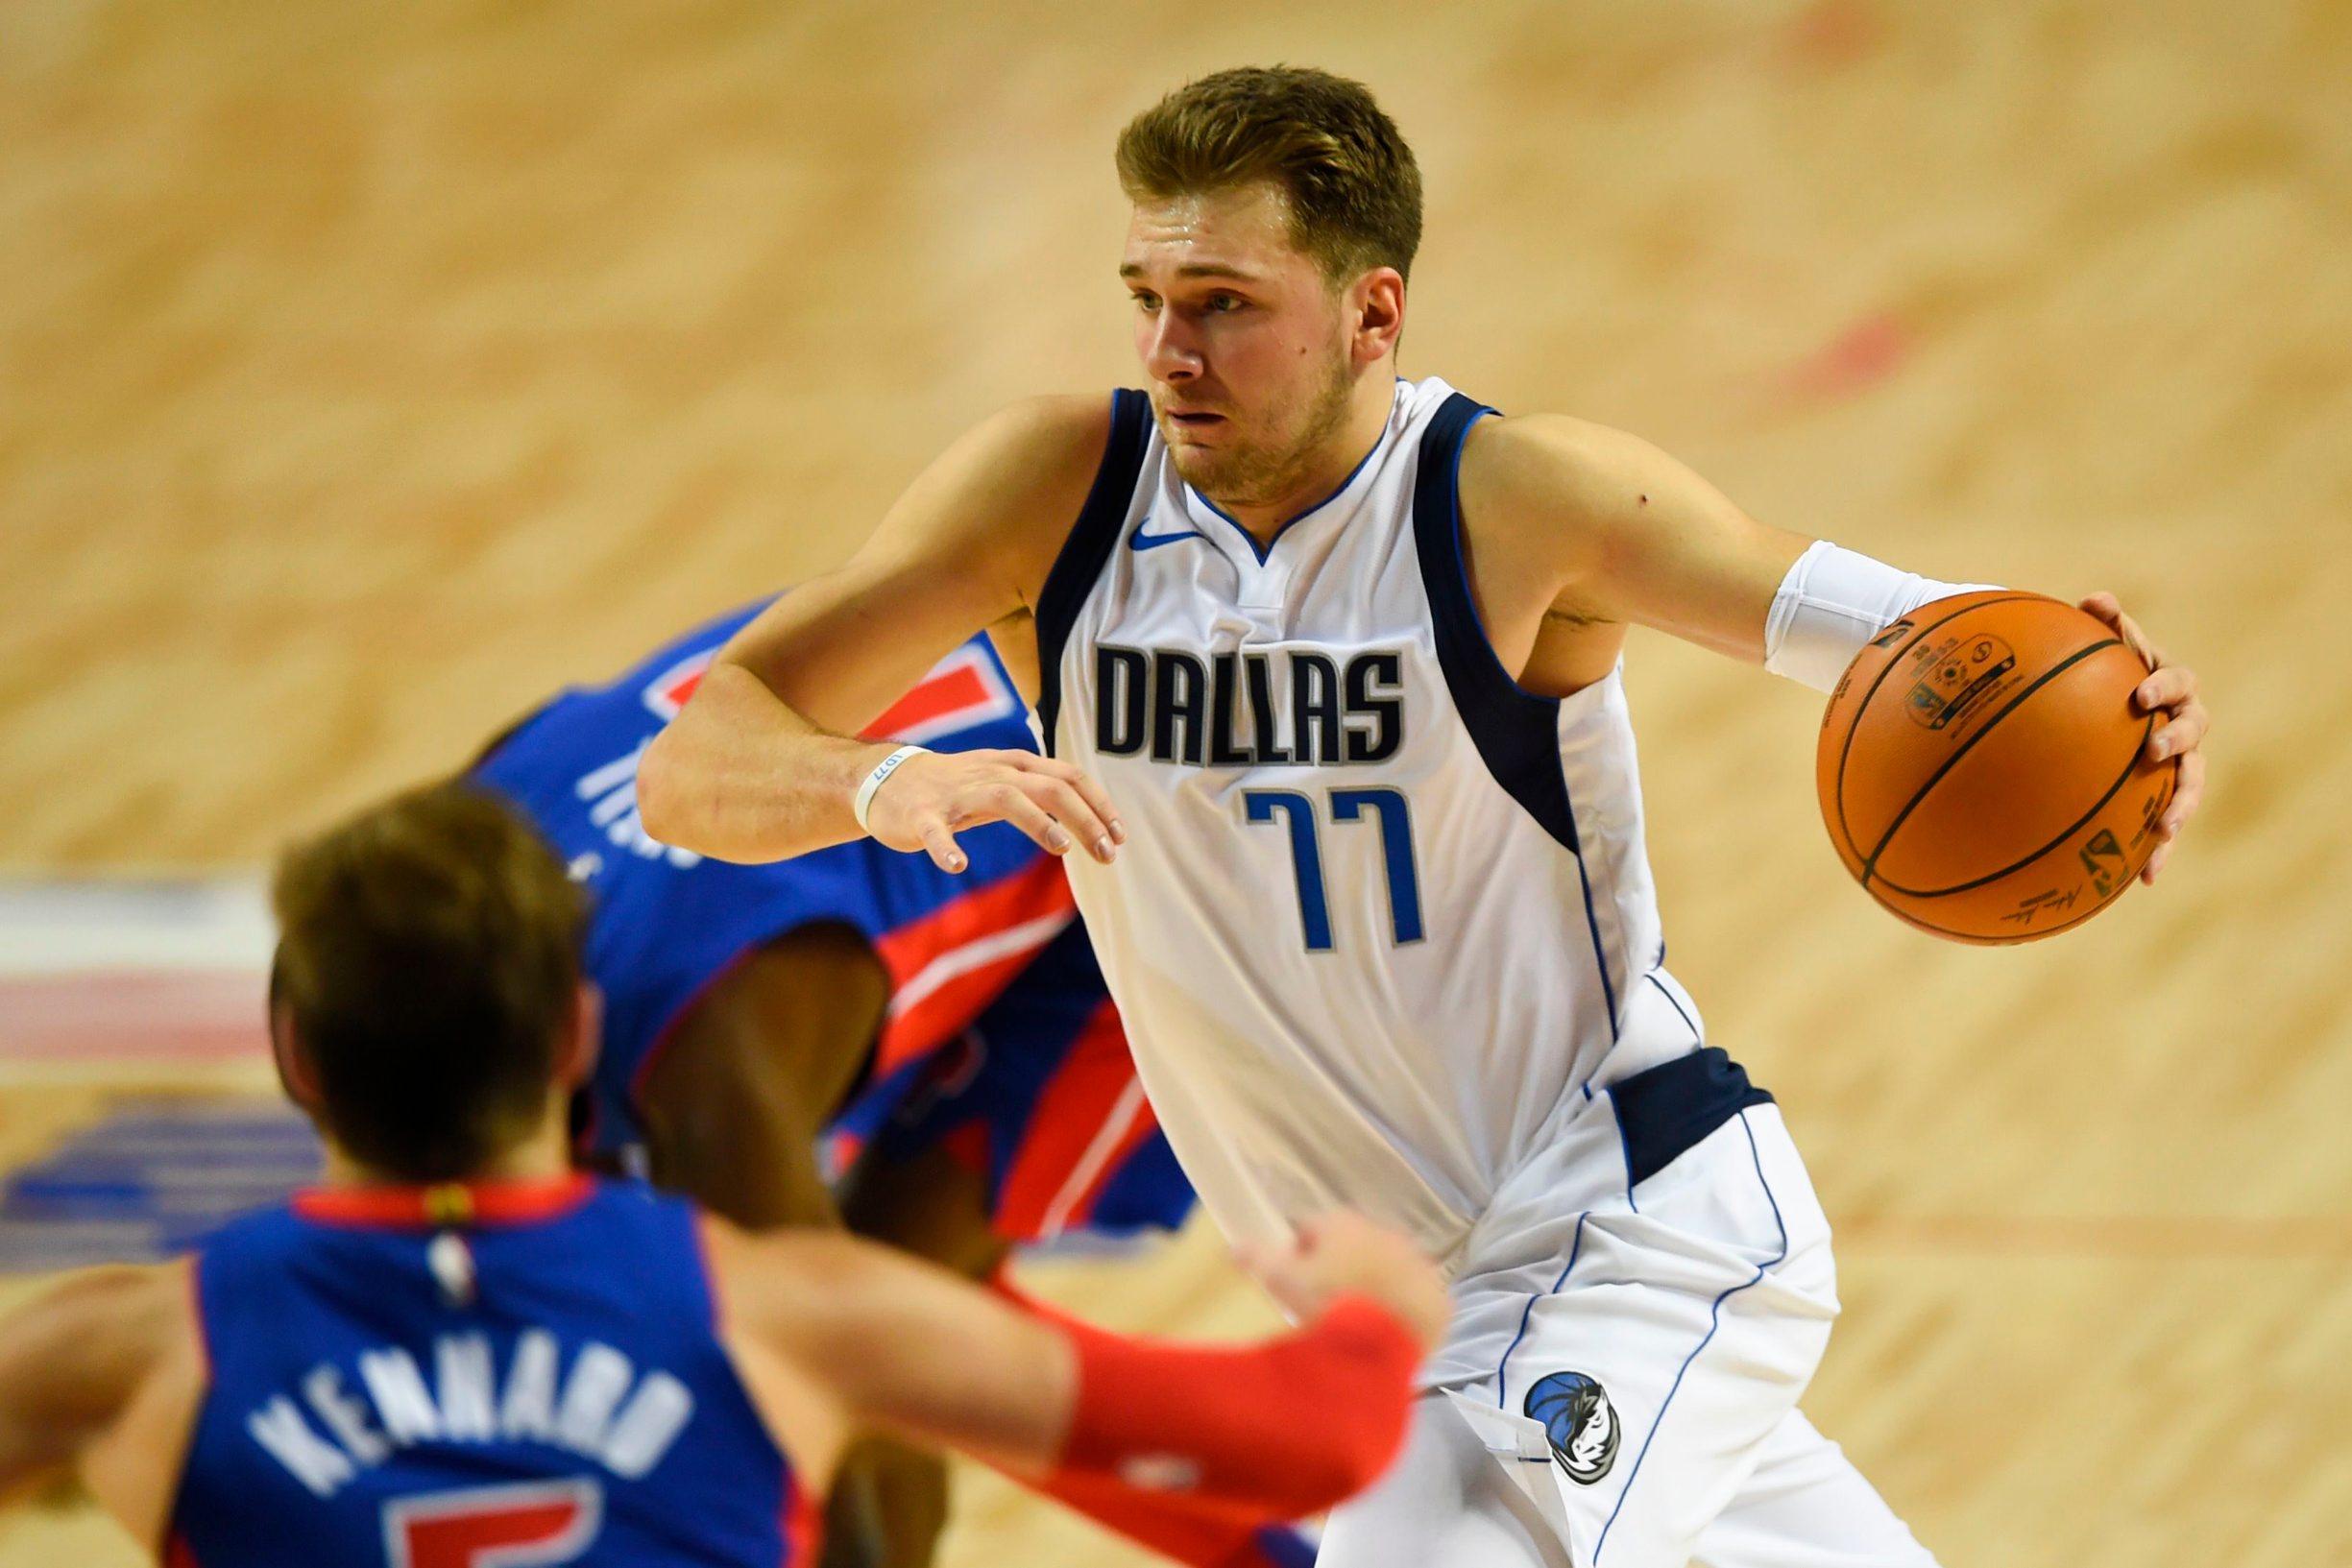 (FILES) In this file photo taken on December 12, 2019 Dallas Mavericks' Slovenian point guard Luka Doncic controls the ball, during their NBA Global Games match against the Detroit pistons at the Mexico City Arena, in Mexico City. - Slovenian guard Luka Doncic edged reigning NBA Most Valuable Player Giannis Antetokounmpo of Milwaukee for the overall lead in early NBA All-Star Game voting results released on January 2, 2020. (Photo by PEDRO PARDO / AFP)